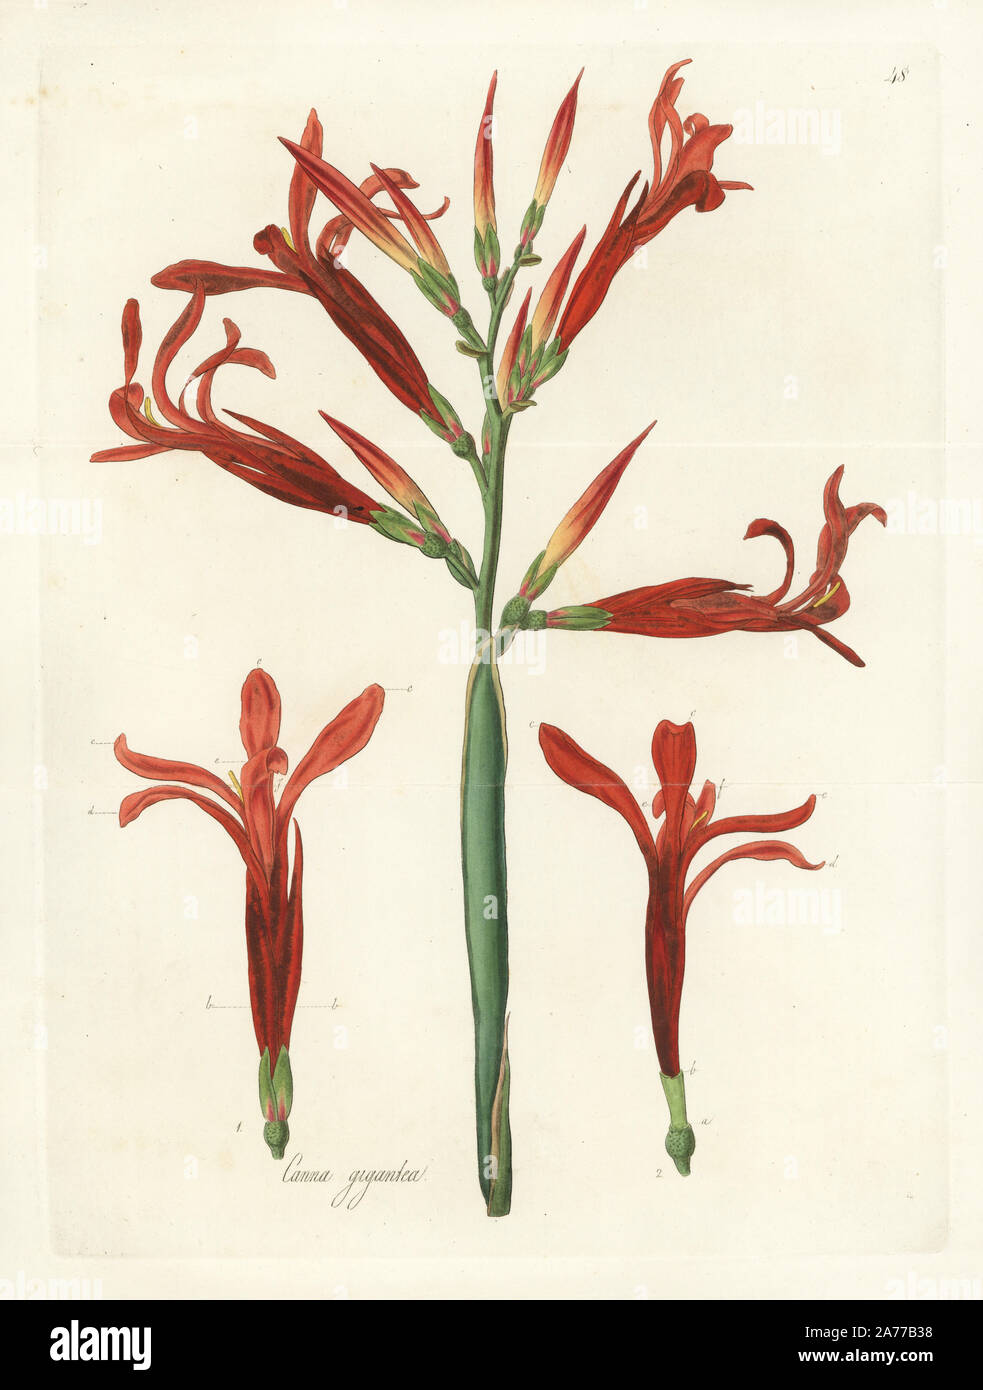 Giant canna flower, Canna tuerckheimii (Tall Indian shot, Canna gigantea). Handcoloured copperplate engraving by J. Swan after a botanical illustration by William Jackson Hooker from his own 'Exotic Flora,' Blackwood, Edinburgh, 1823. Hooker (1785-1865) was an English botanist who specialized in orchids and ferns, and was director of the Royal Botanical Gardens at Kew from 1841. Stock Photo